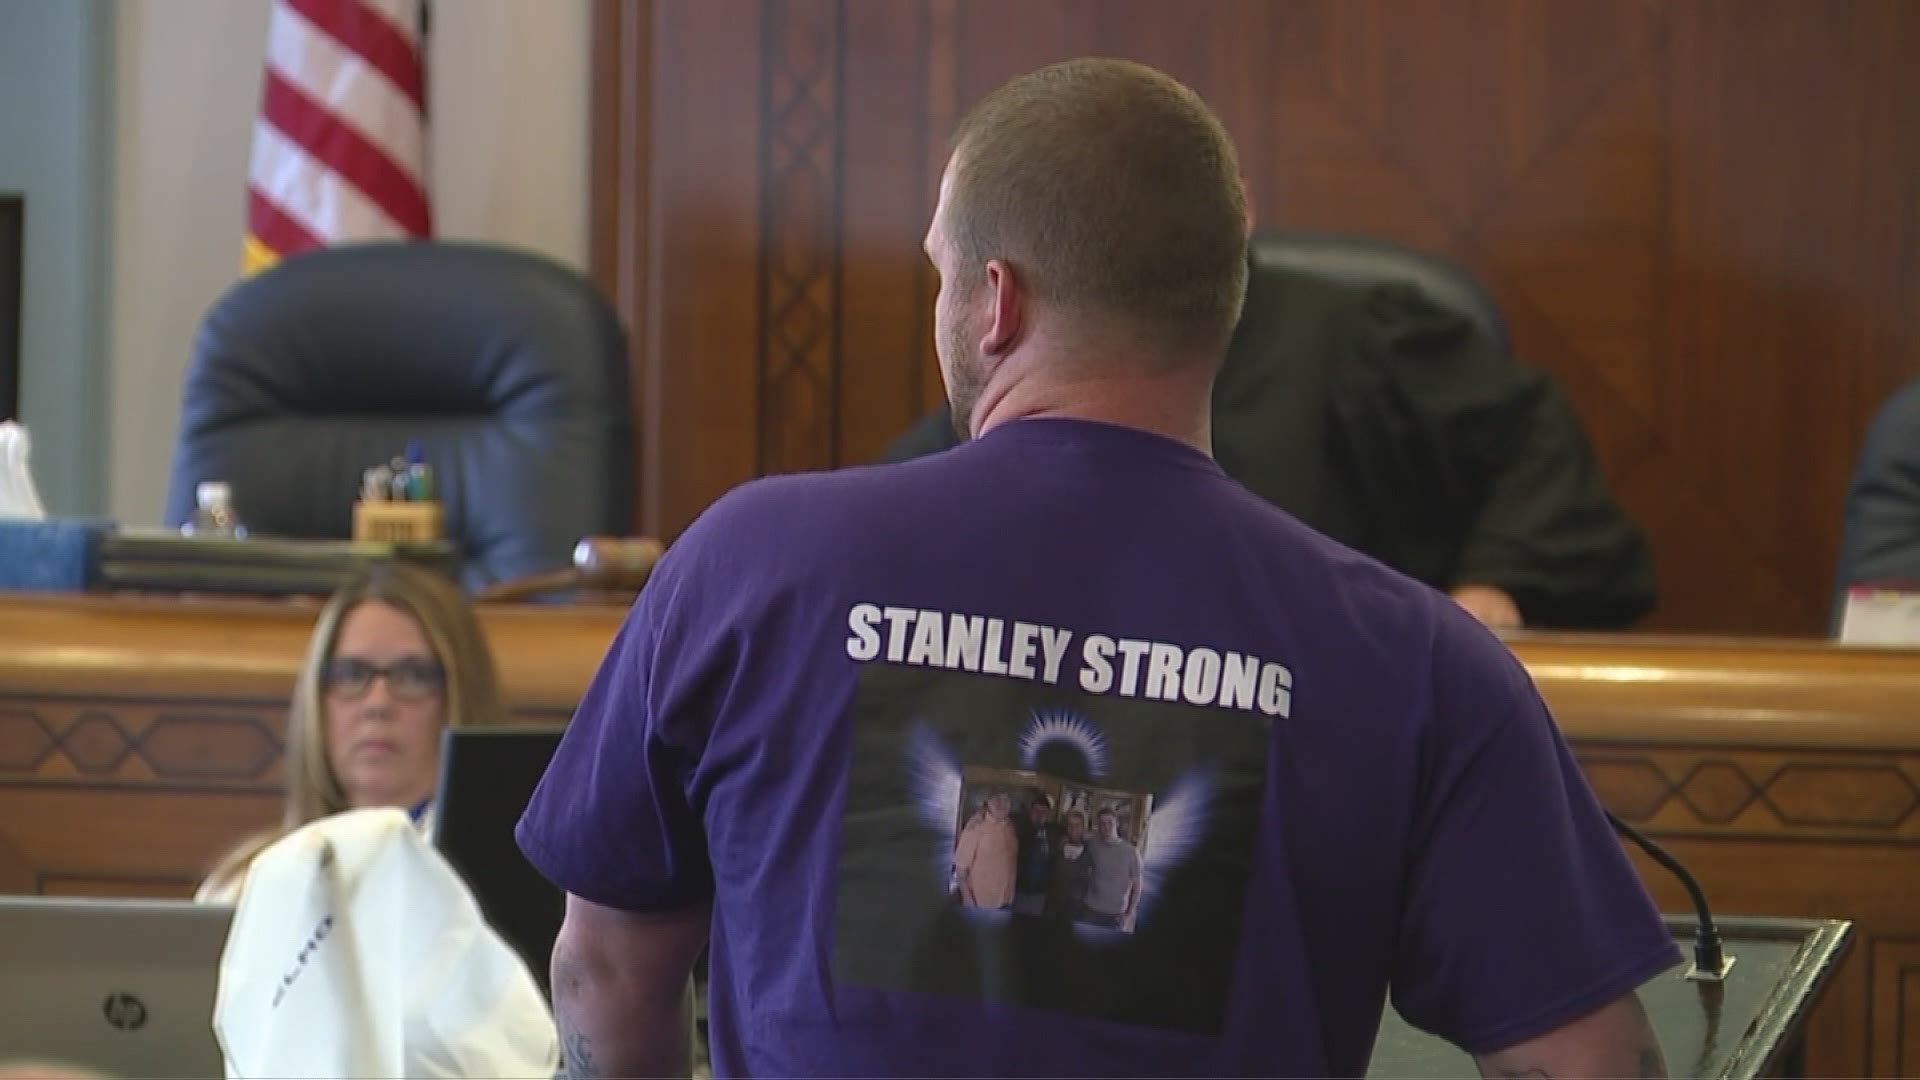 Stacey Stanley's son addresses Shawn Grate in court prior to the announcement that Grate received the death penalty.